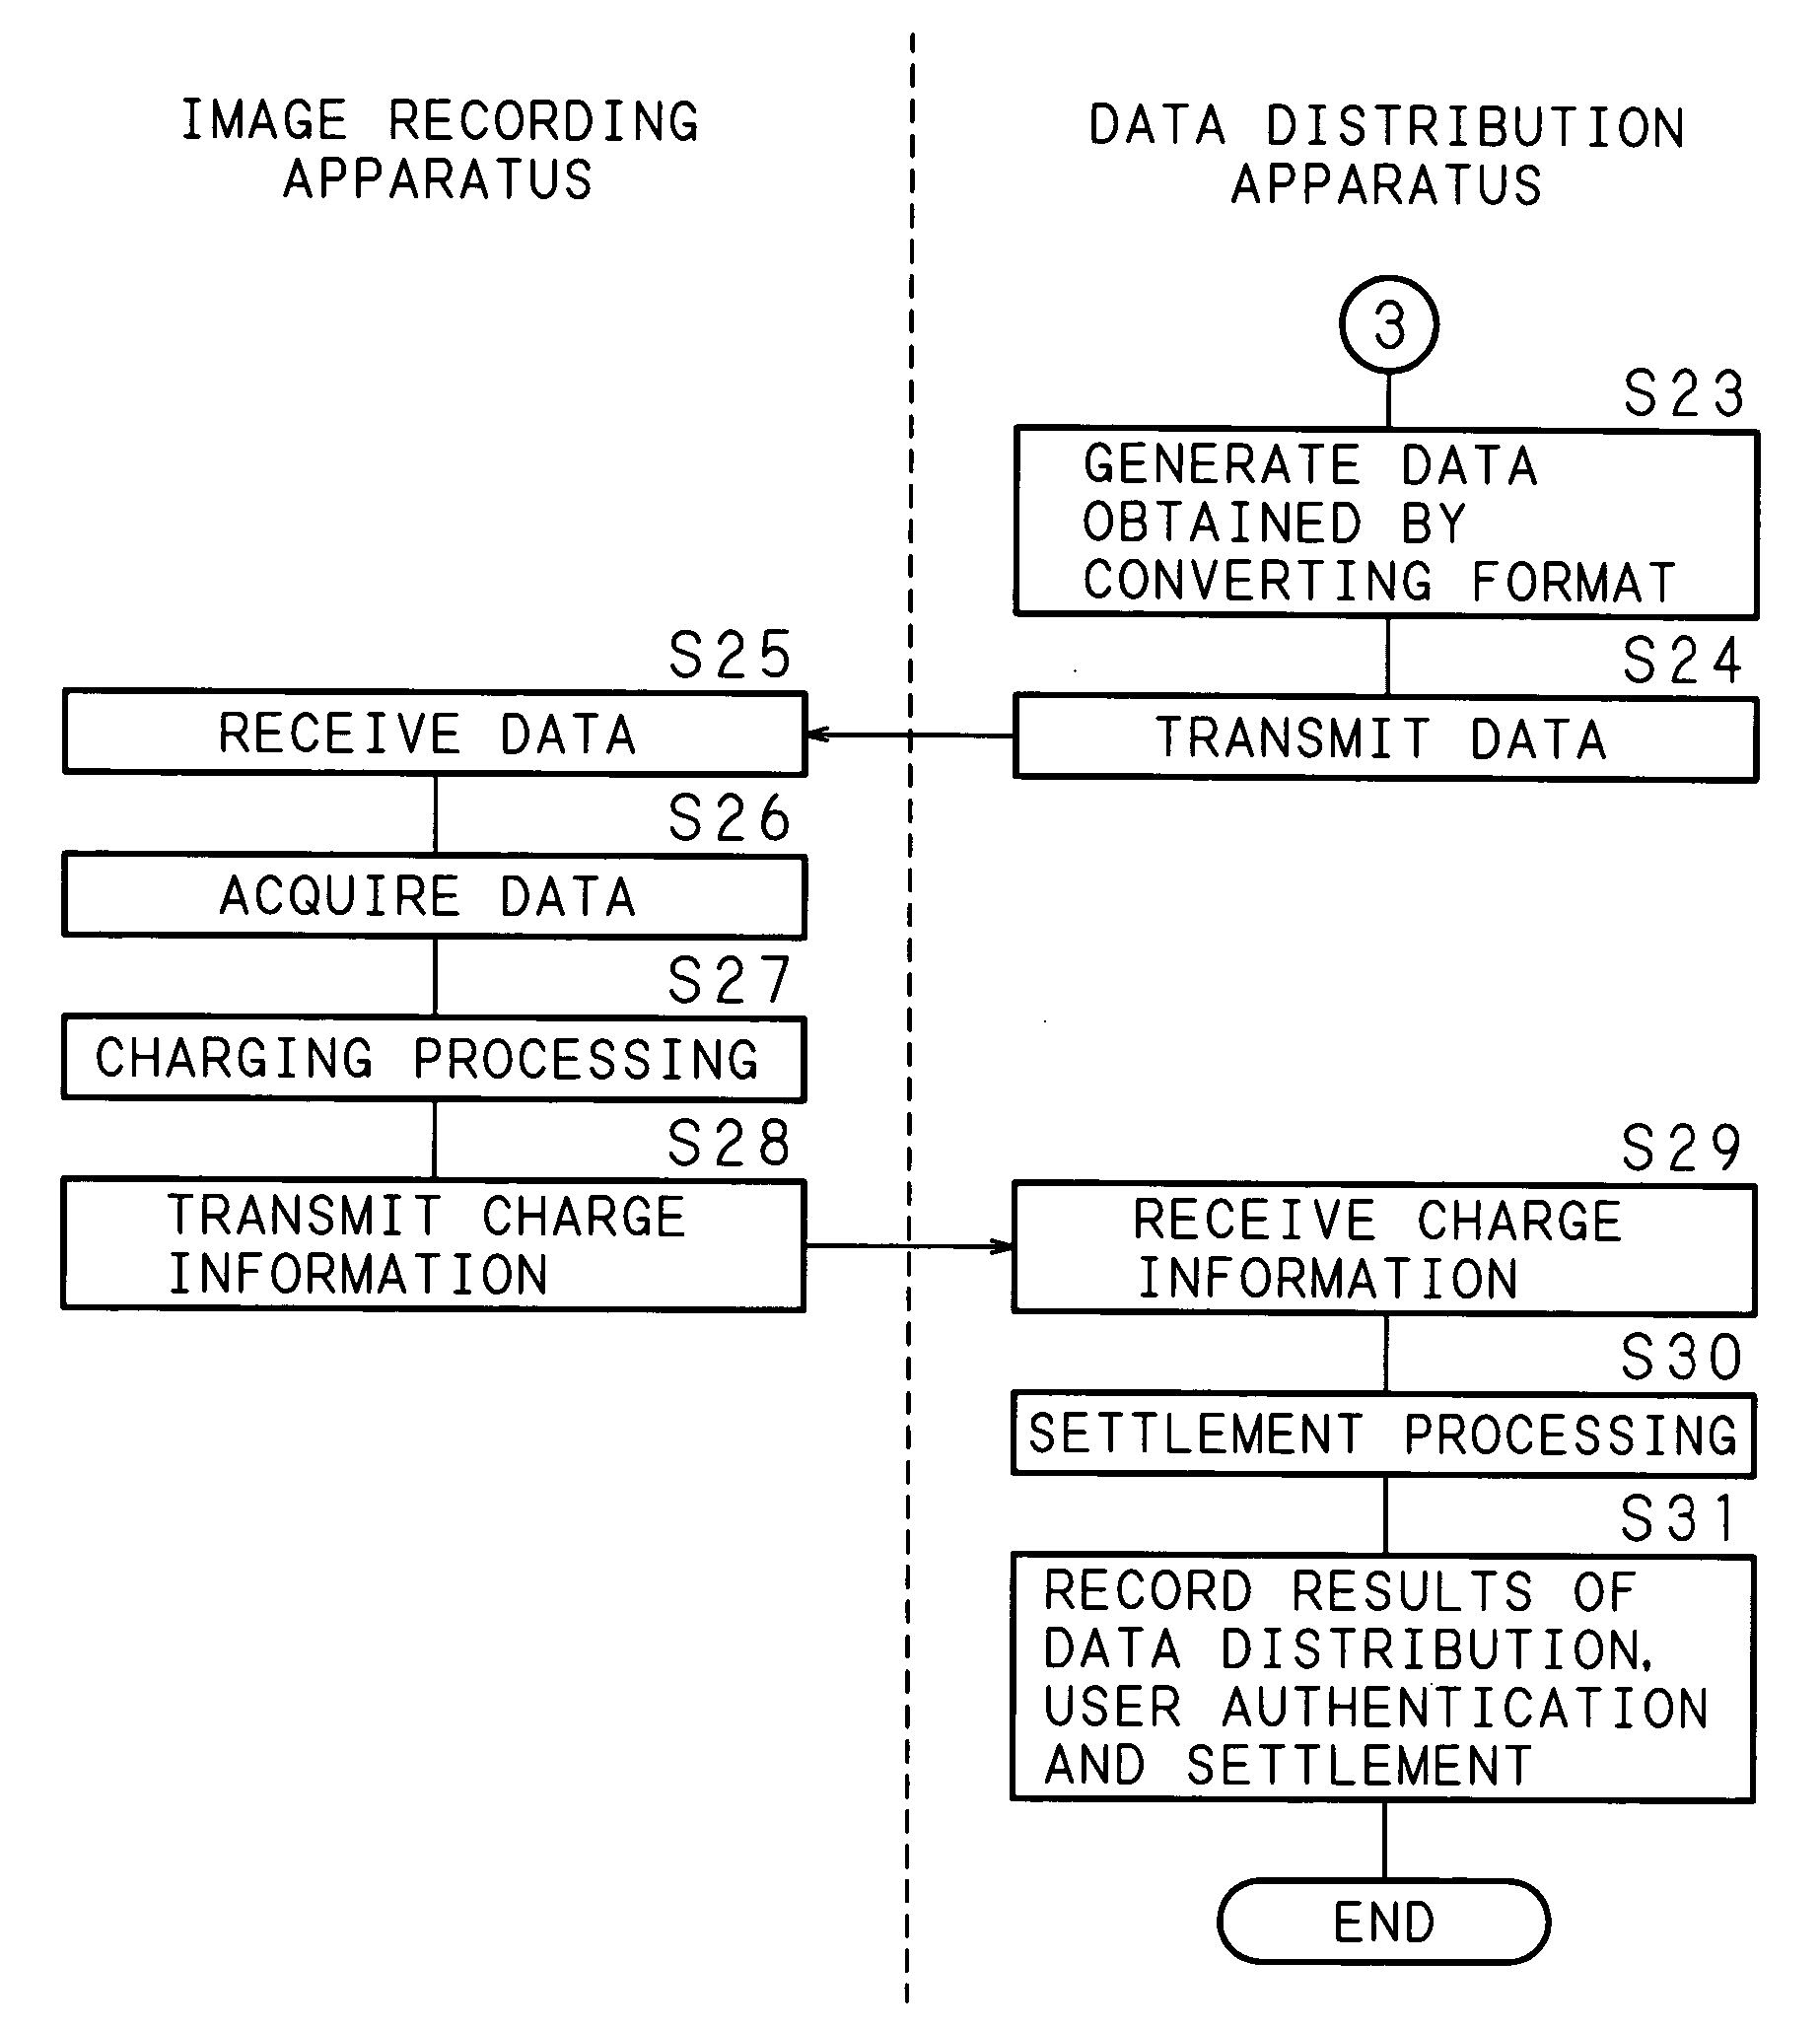 Data distribution system and data distribution apparatus